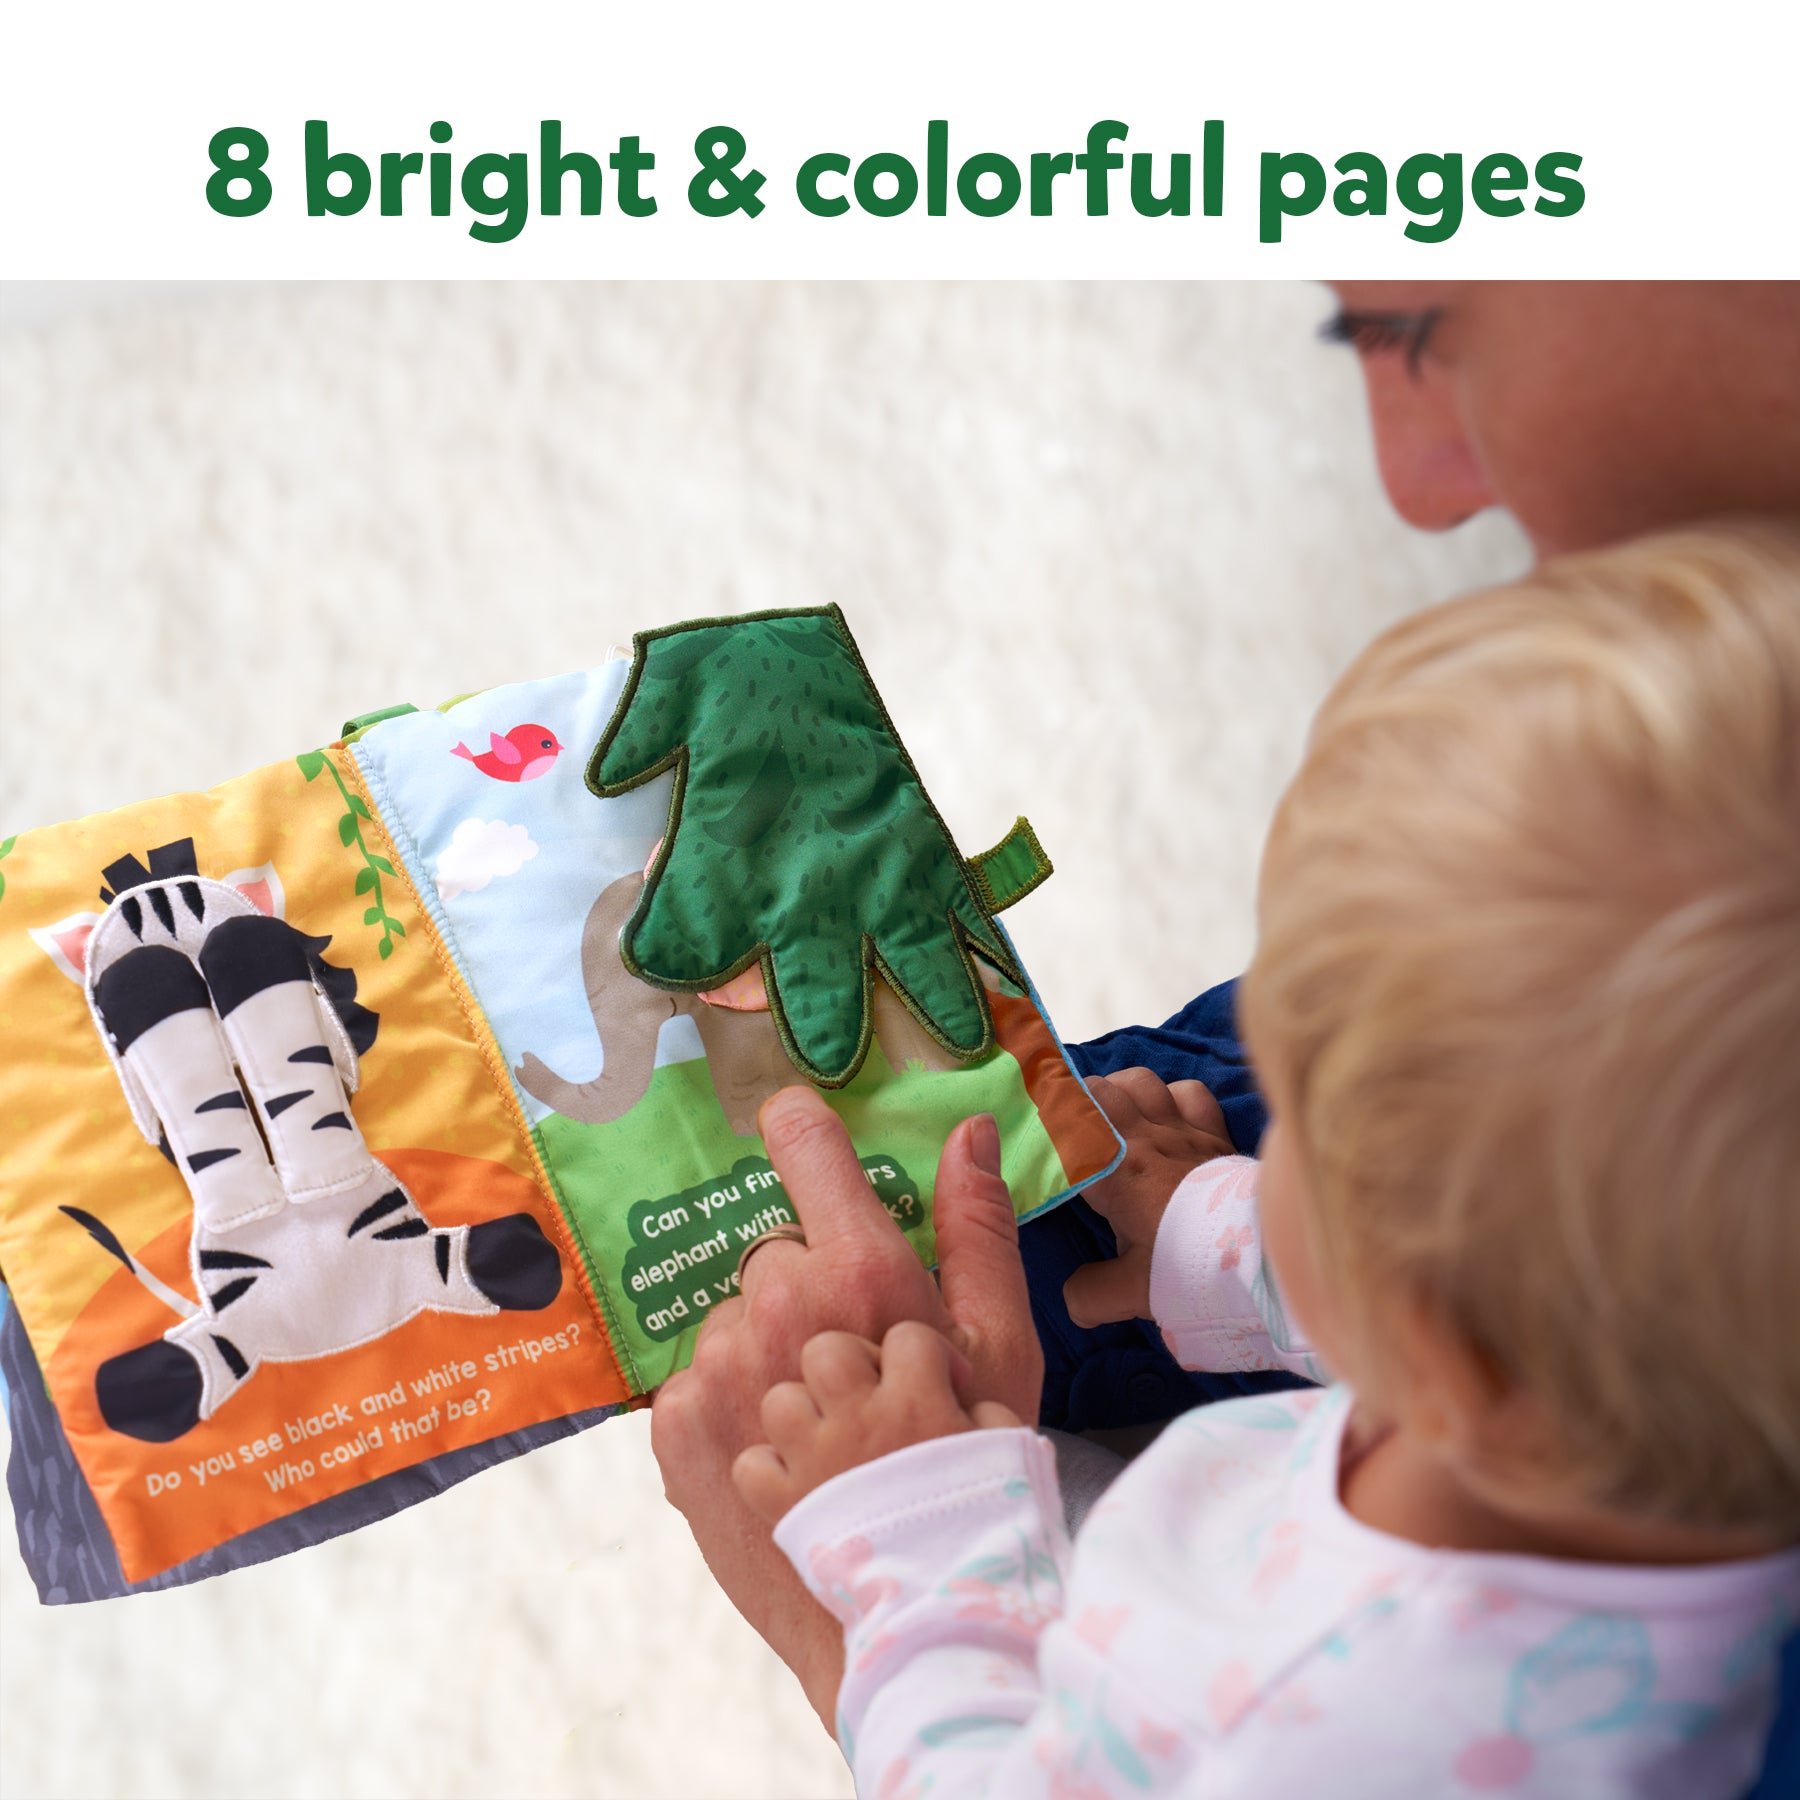 Skillmatics Baby Book - Peek-A-Boo I See You Jungle Theme, Interactive Soft Cloth Book With Crinkle Pages, Ages 6 Months And Up